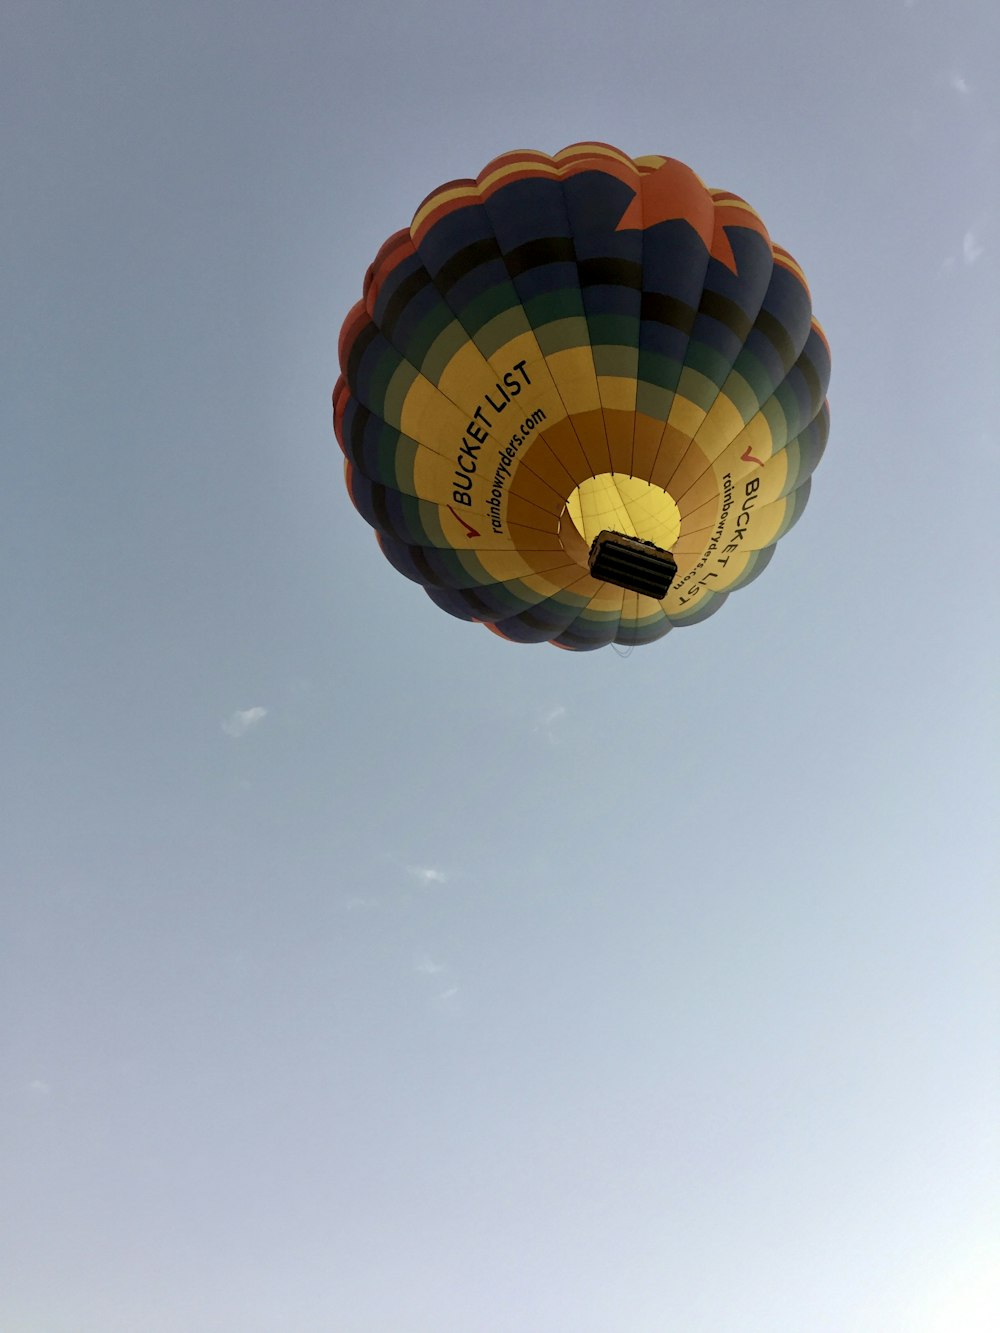 blue red and yellow hot air balloon in mid air